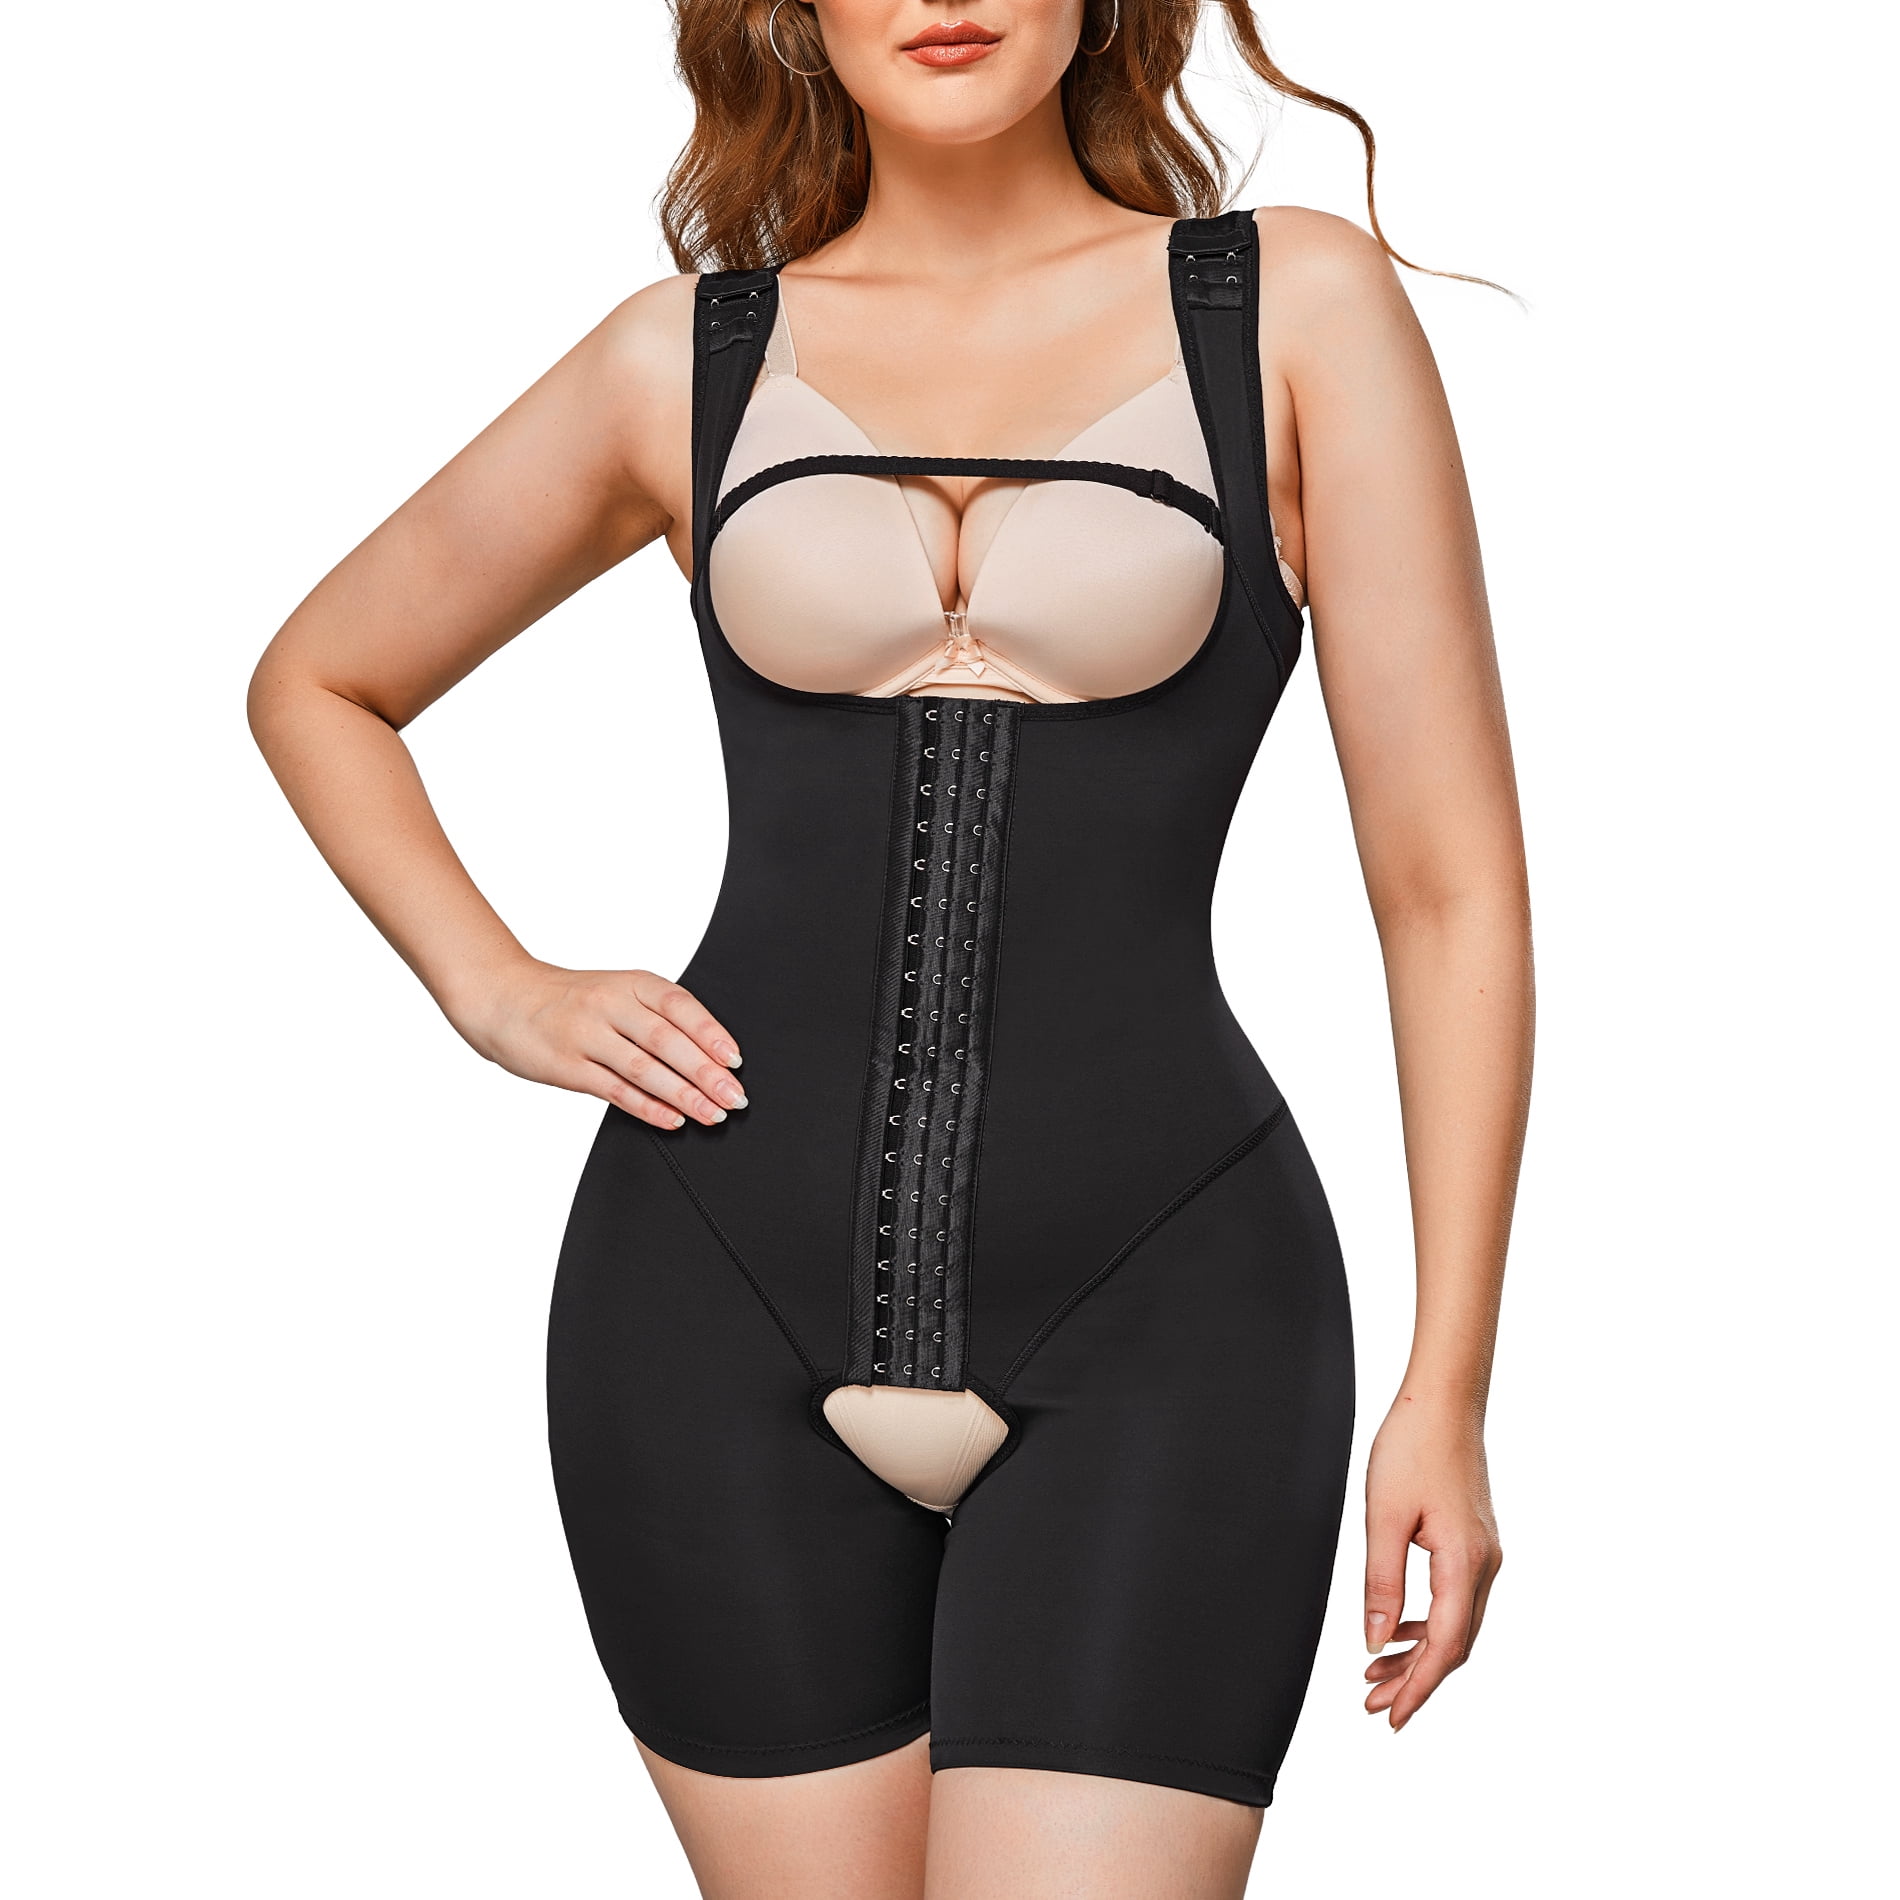 Gotoly Stretchable Moisture Wicking Waist Trainer